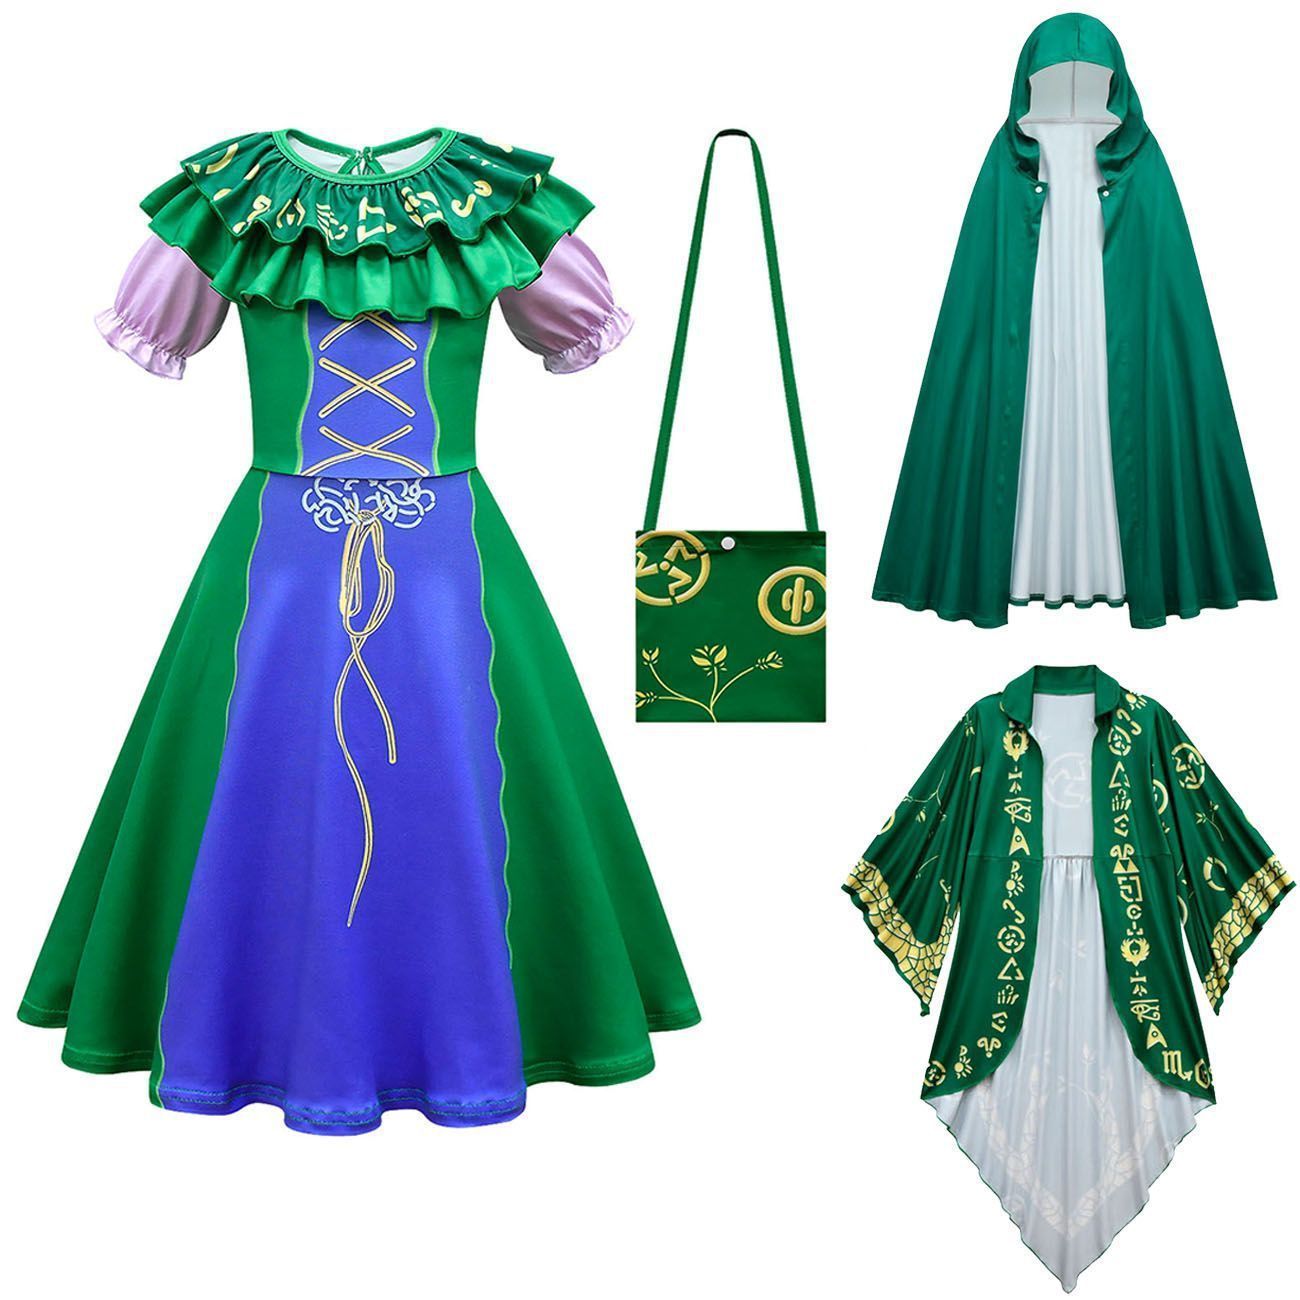 Green Hocus Pocus Winifred Sanderson Cosplay Suit Costume Dress Outfits for kids